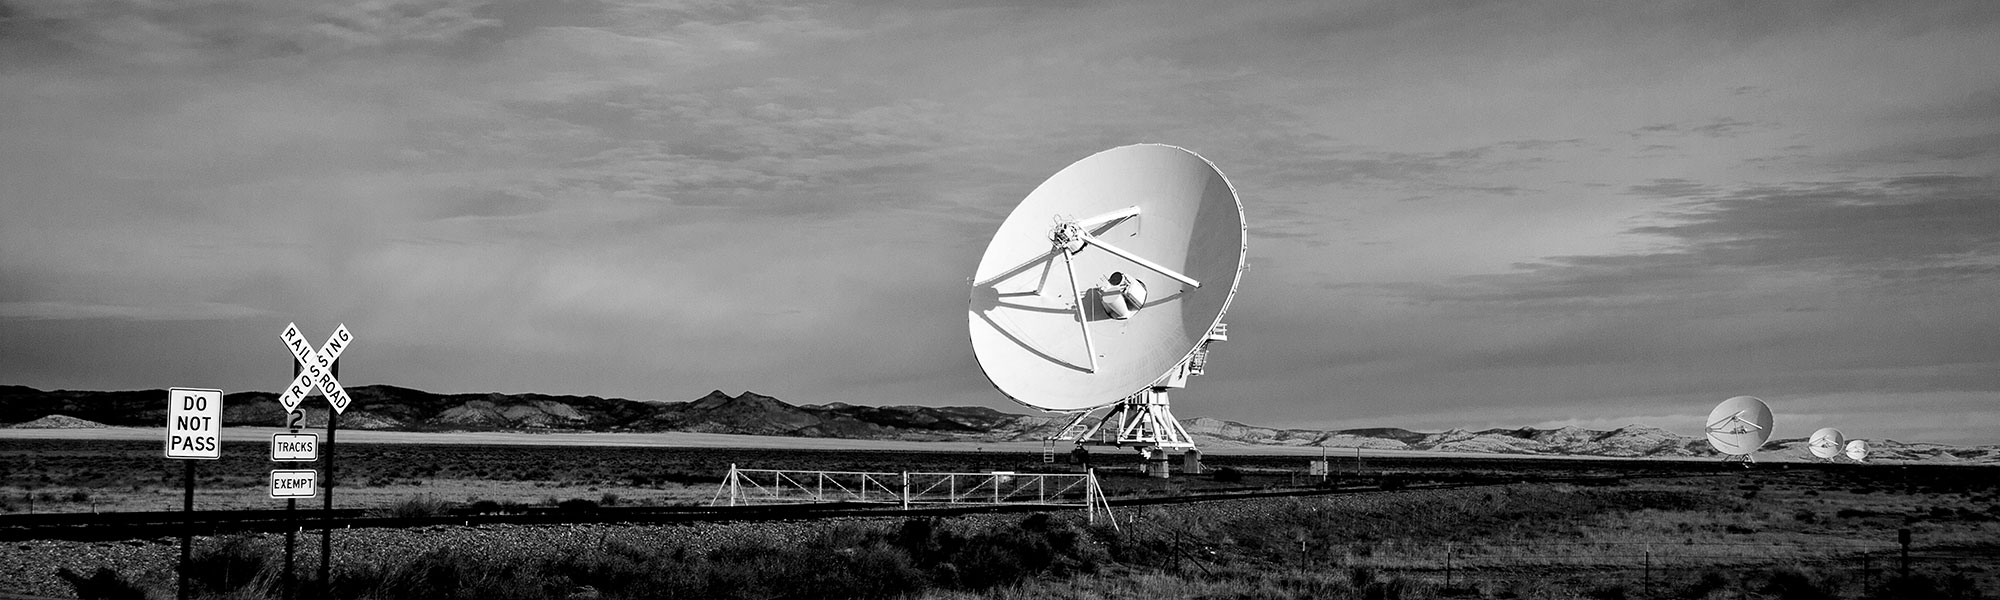 The Very Large Array seen from near the visitors center